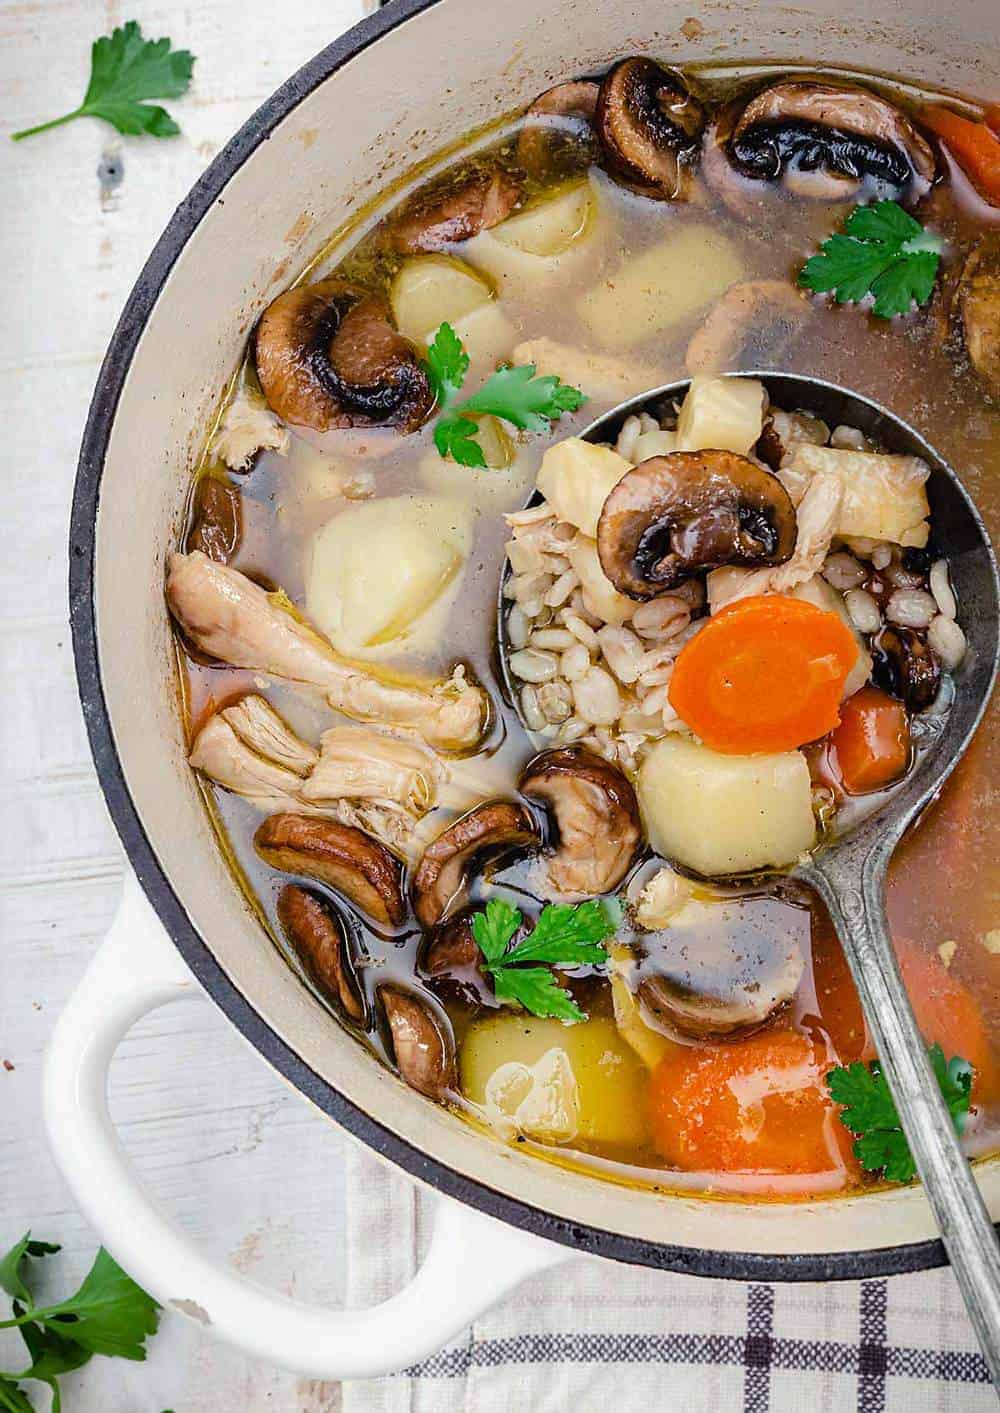 A close up of the krupnik soup with barley, mushrooms, and vegetables in a pot with a ladle.